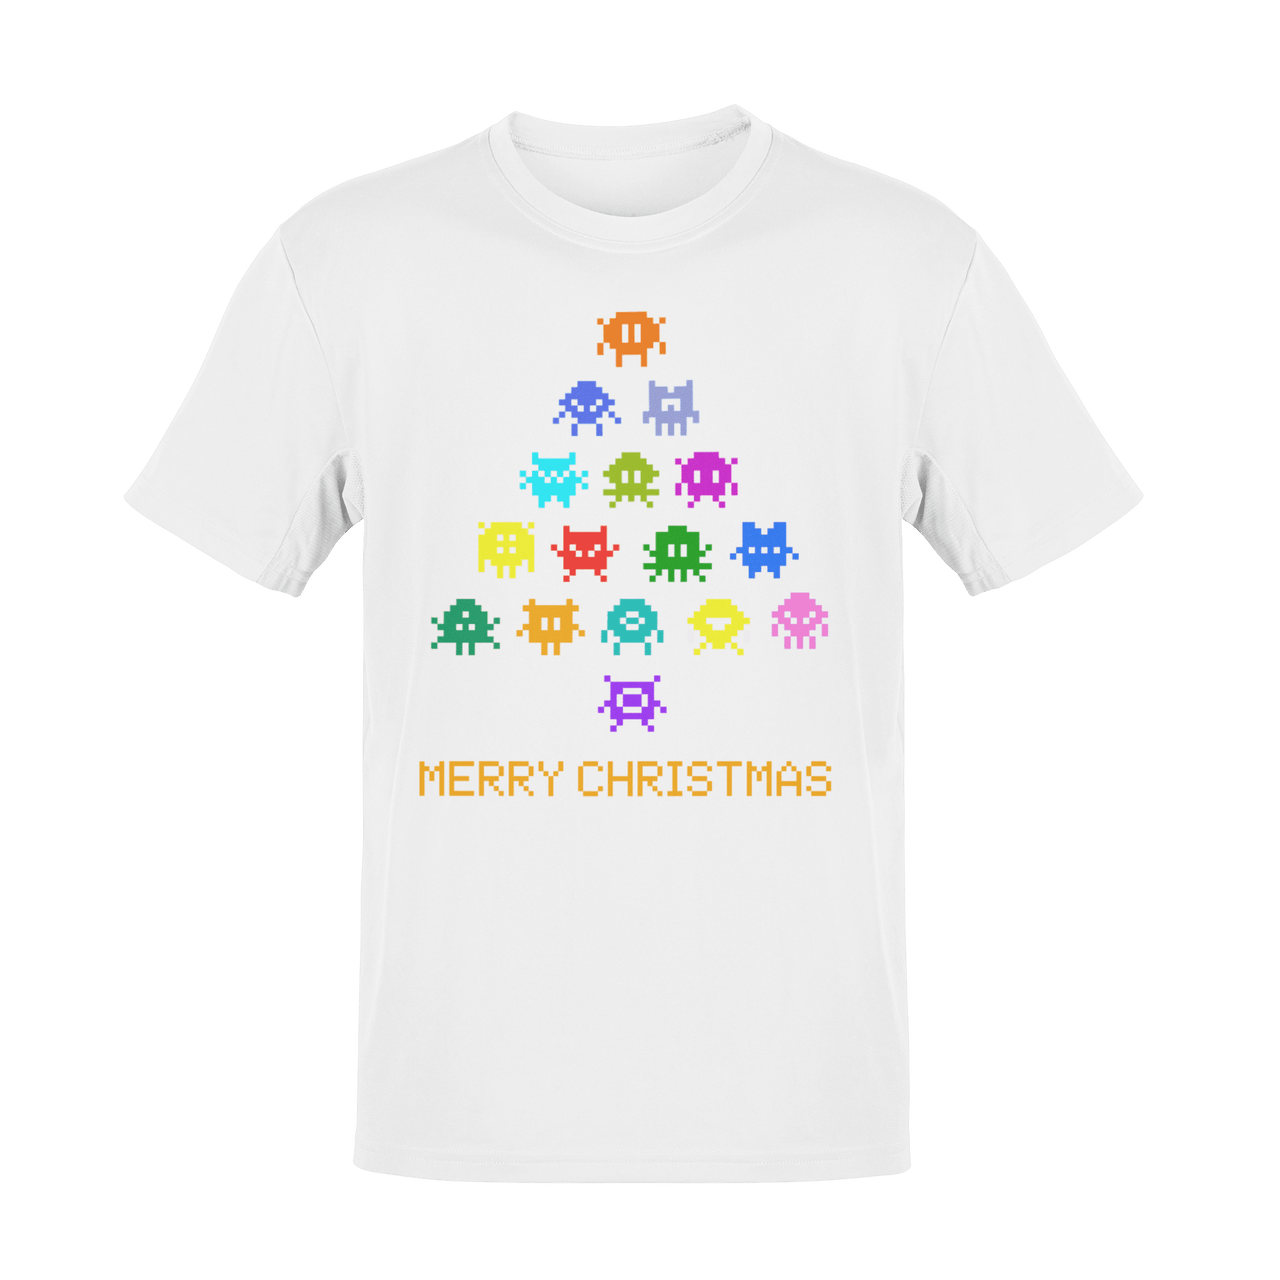 Invaders Christmas Tree Adult for Men and Women Mens Graphic T-Shirt 8Ball